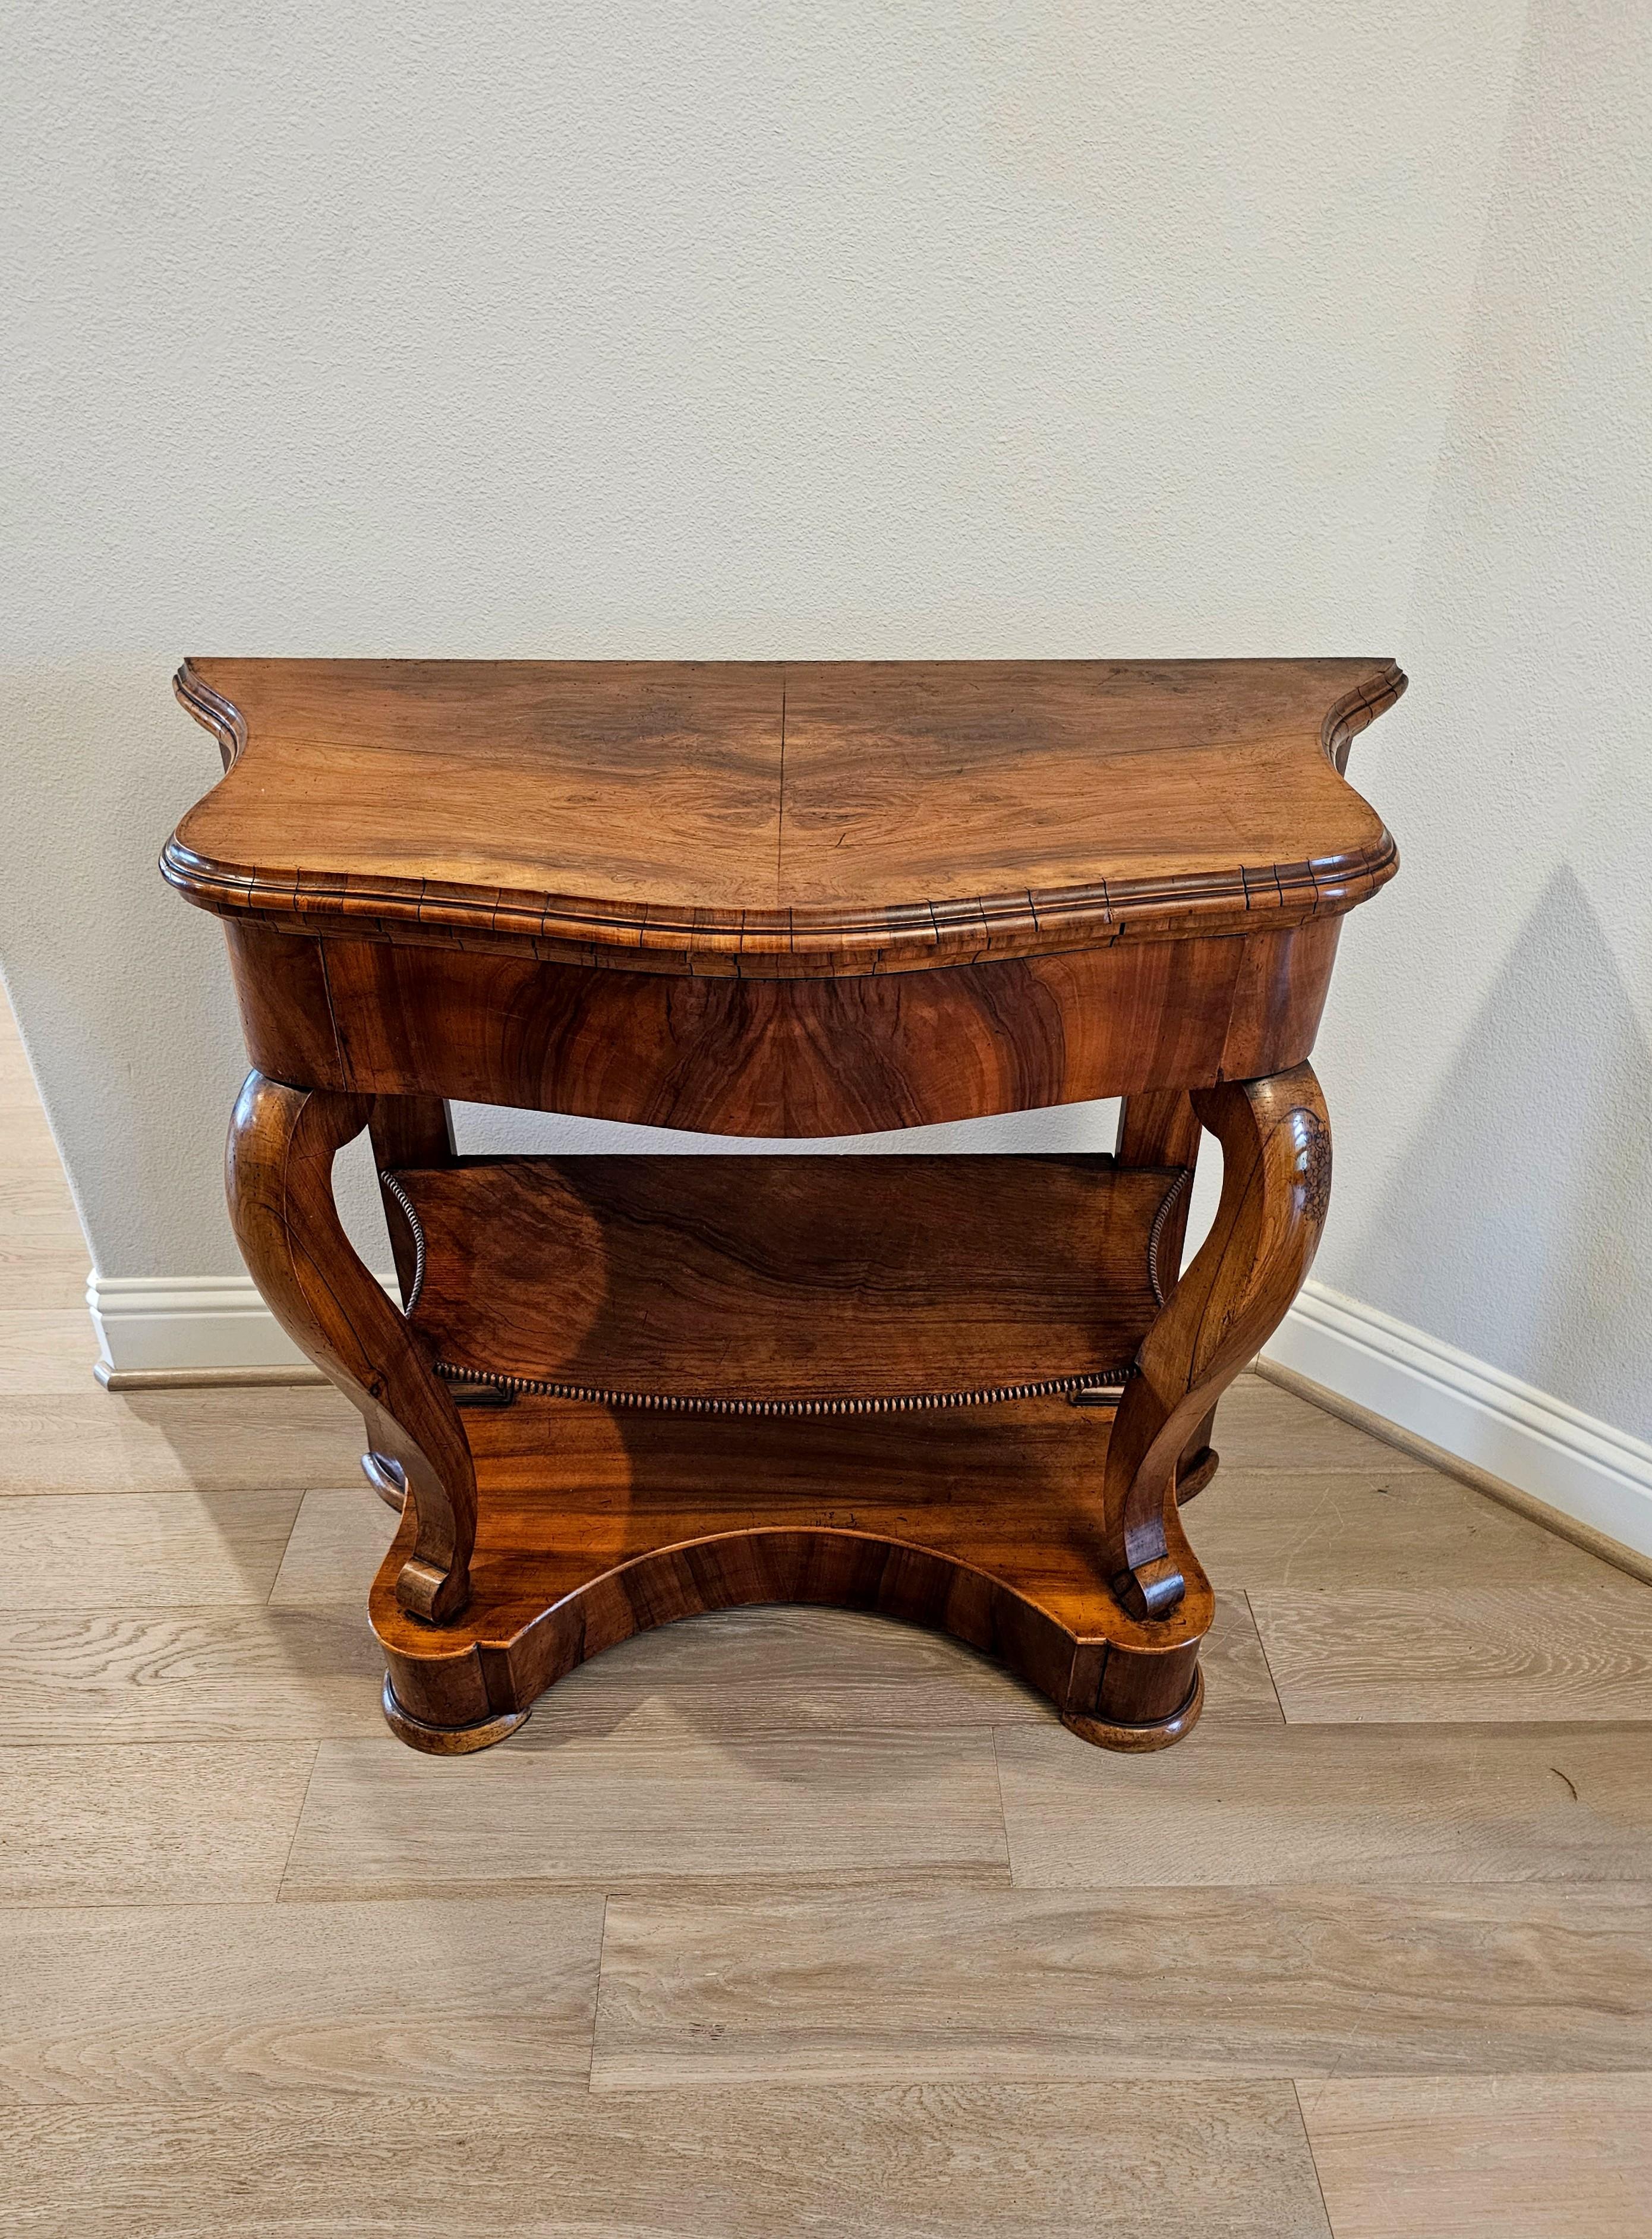 A nearly 200 year old Period Louis Philippe (1830-1848) French burled walnut tiered console table.

Born in France in the mid-19th century, hand-crafted of fine warm rich solid walnut, having a serpentine shaped bookmatched burlwood top with